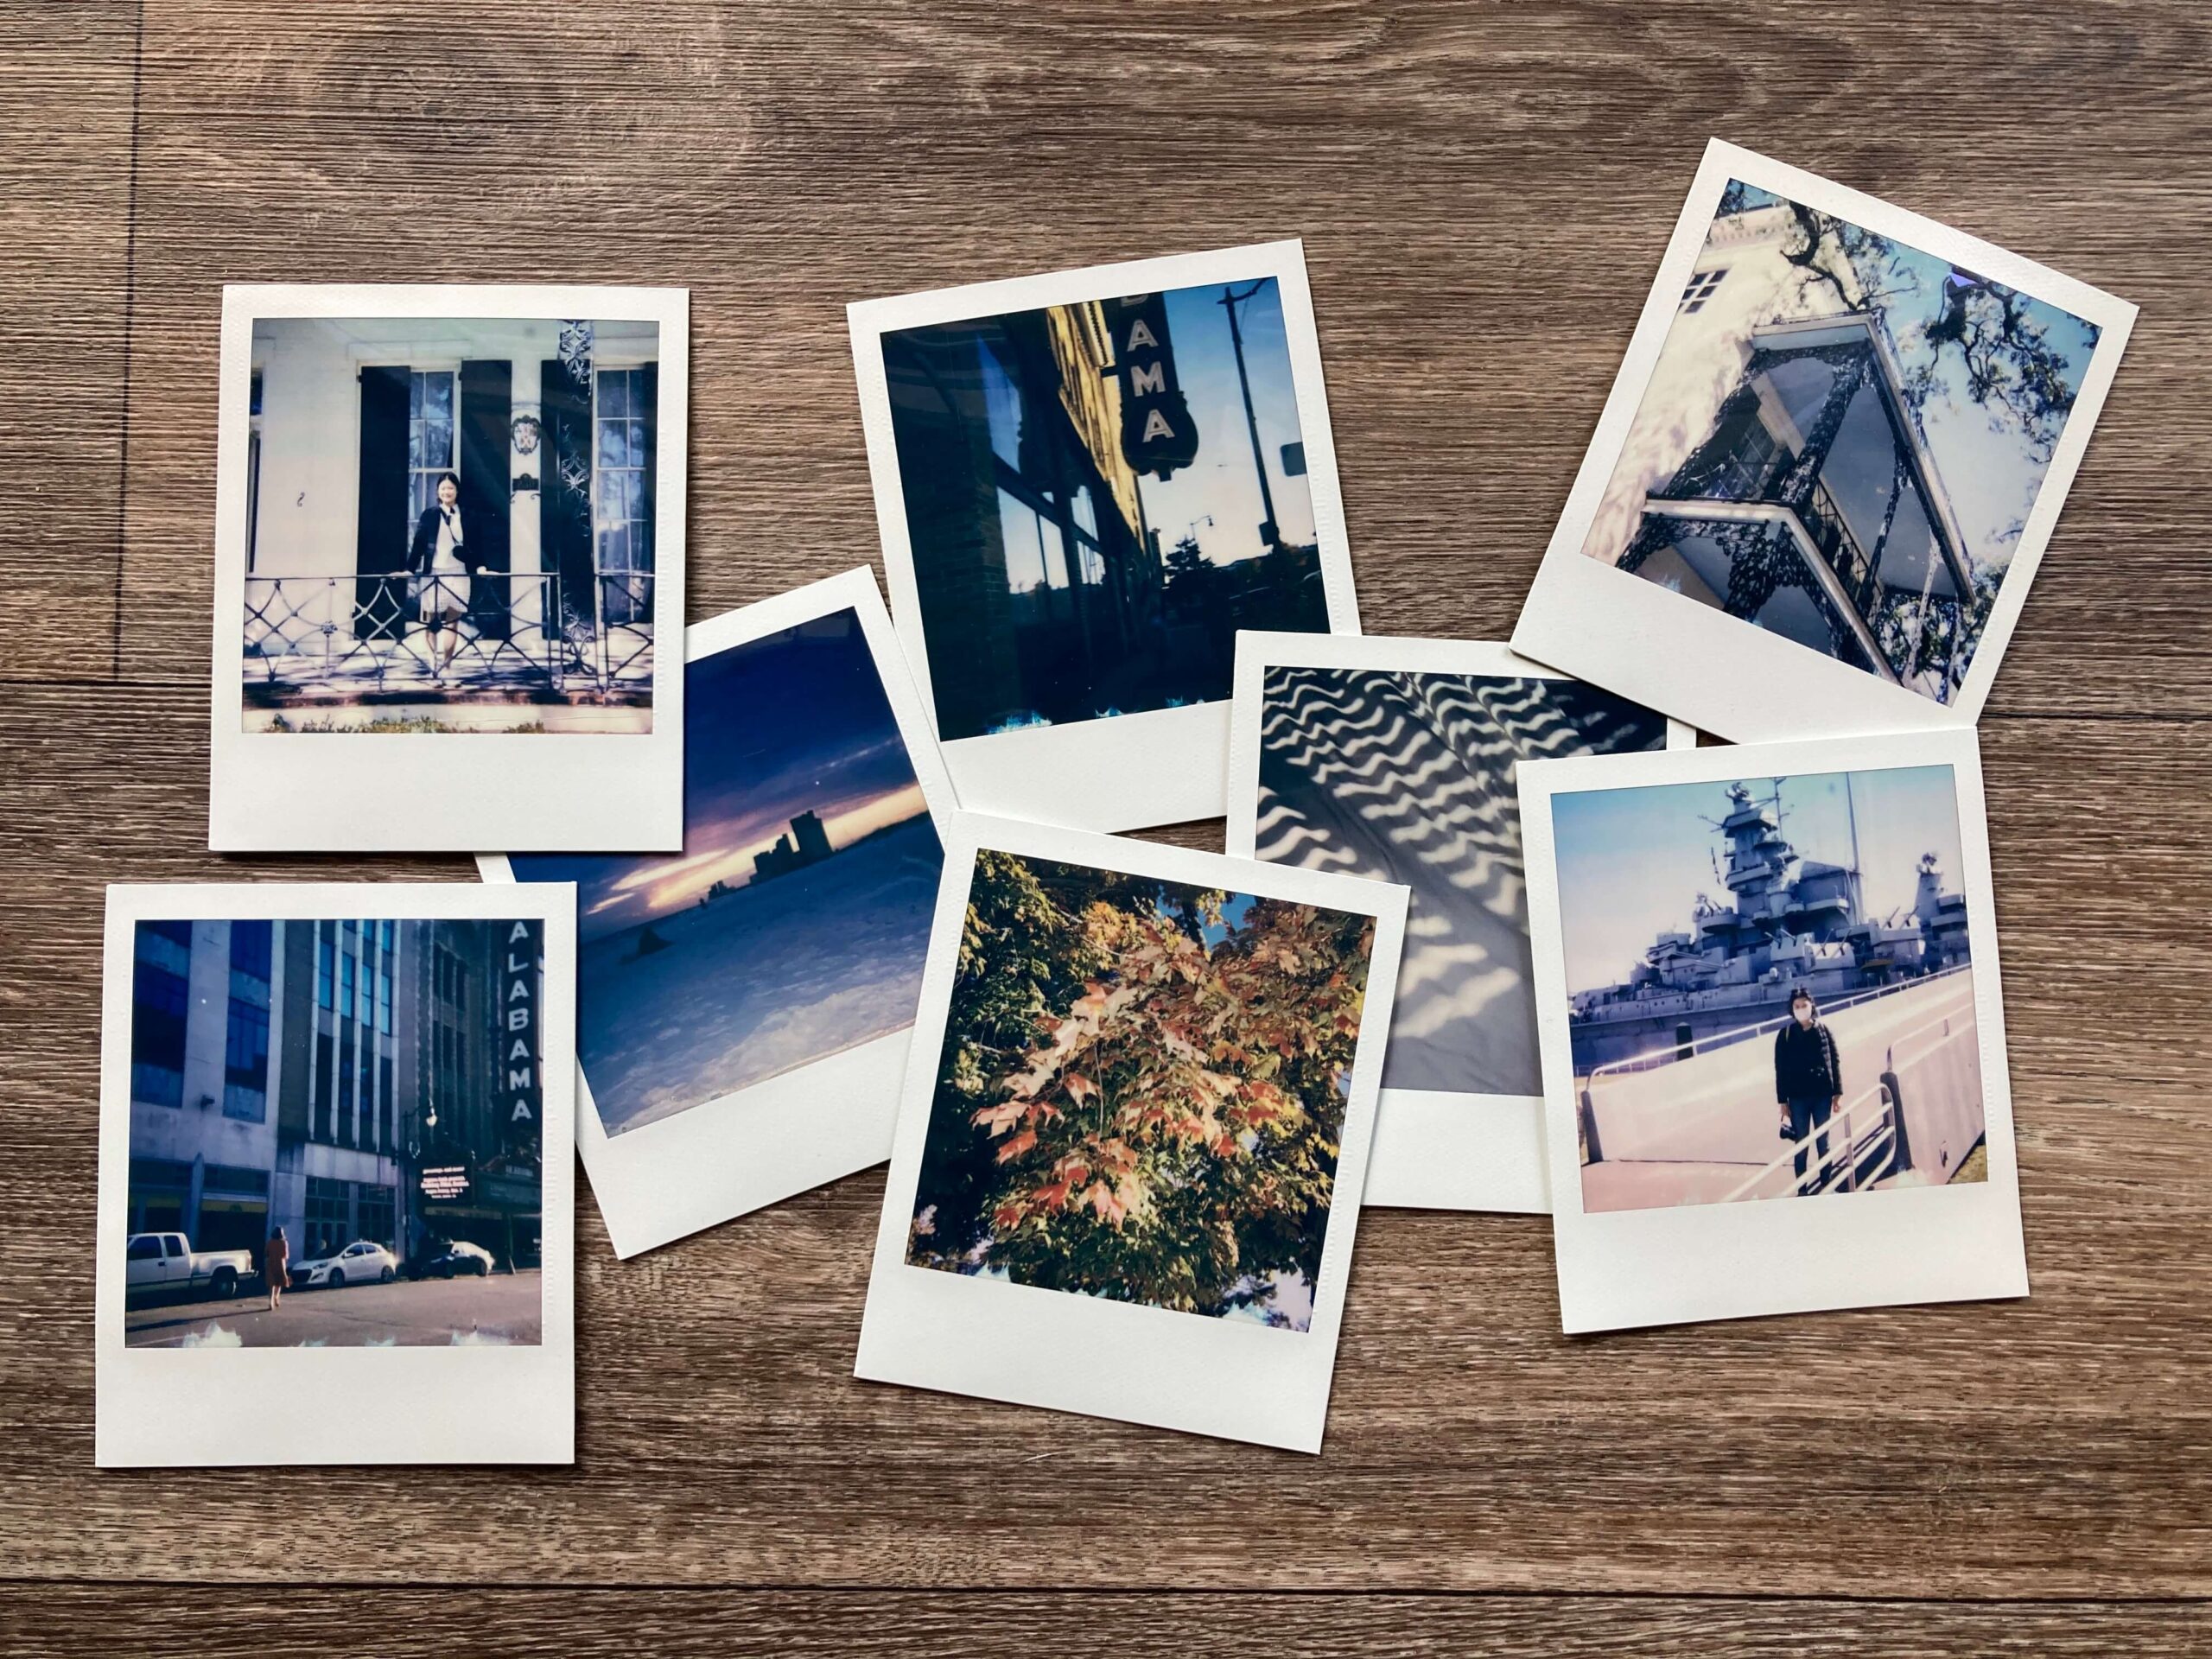 Get groovy: We want to see your best instant photos